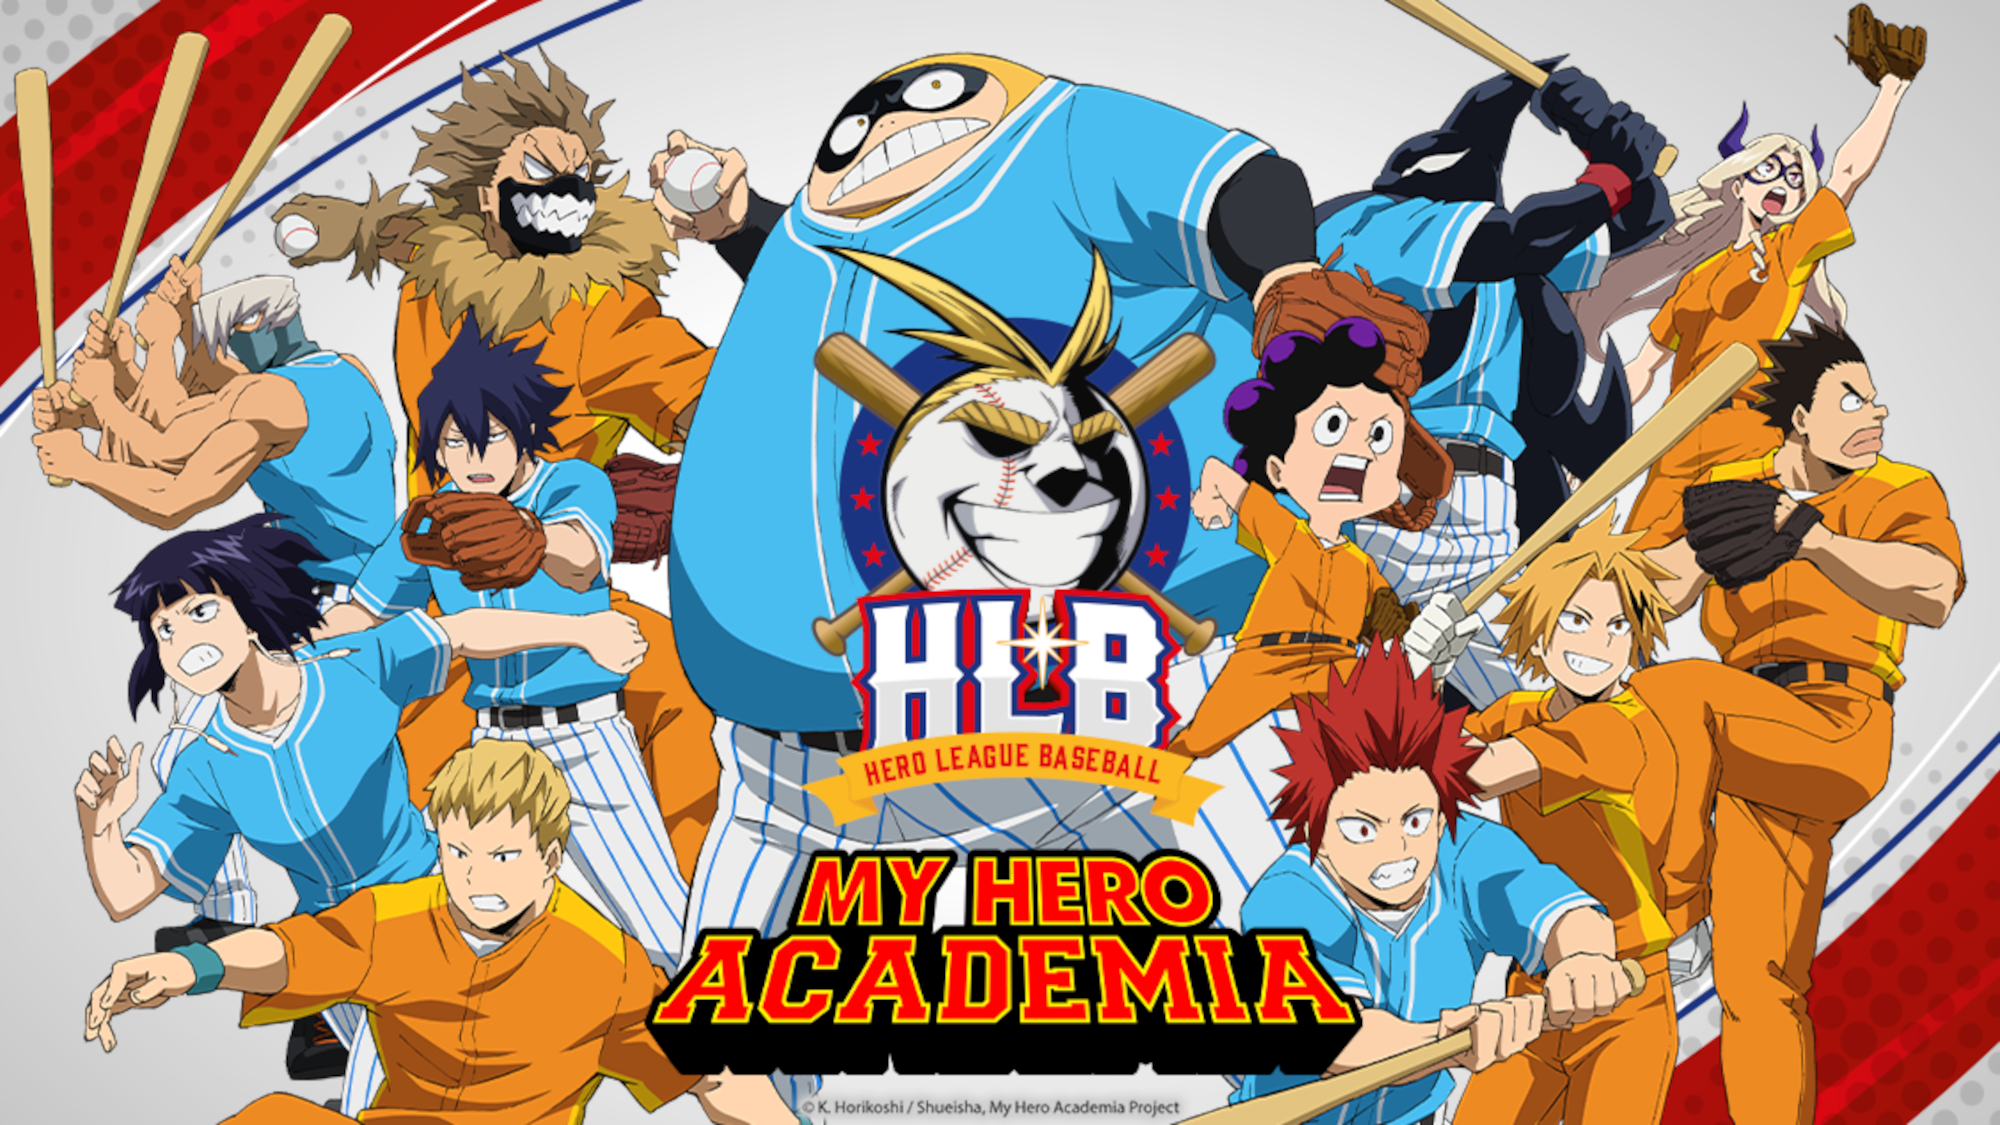 My Hero Academia Anime 6th Season Coming in Fall 2022! 1st Trailer Revealed!